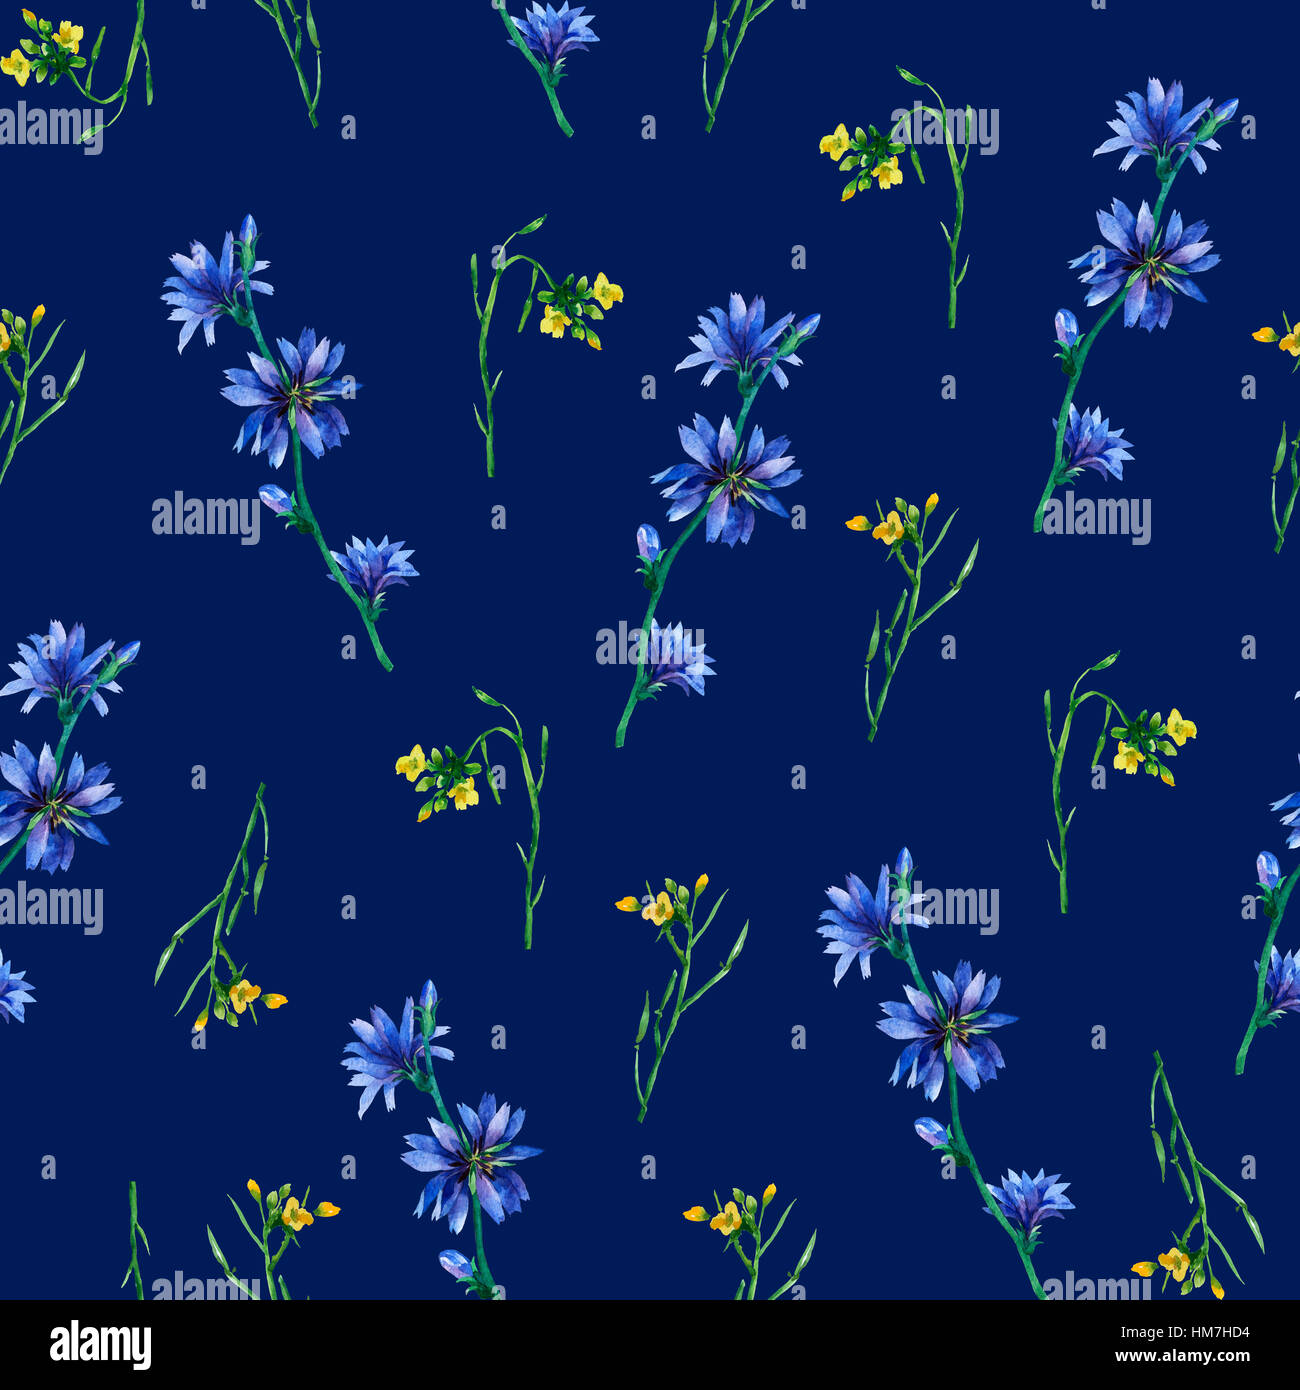 Seamless pattern with yellow rocket and blue chicory flowers. Hand drawn watercolor painting on dark blue background. Stock Photo